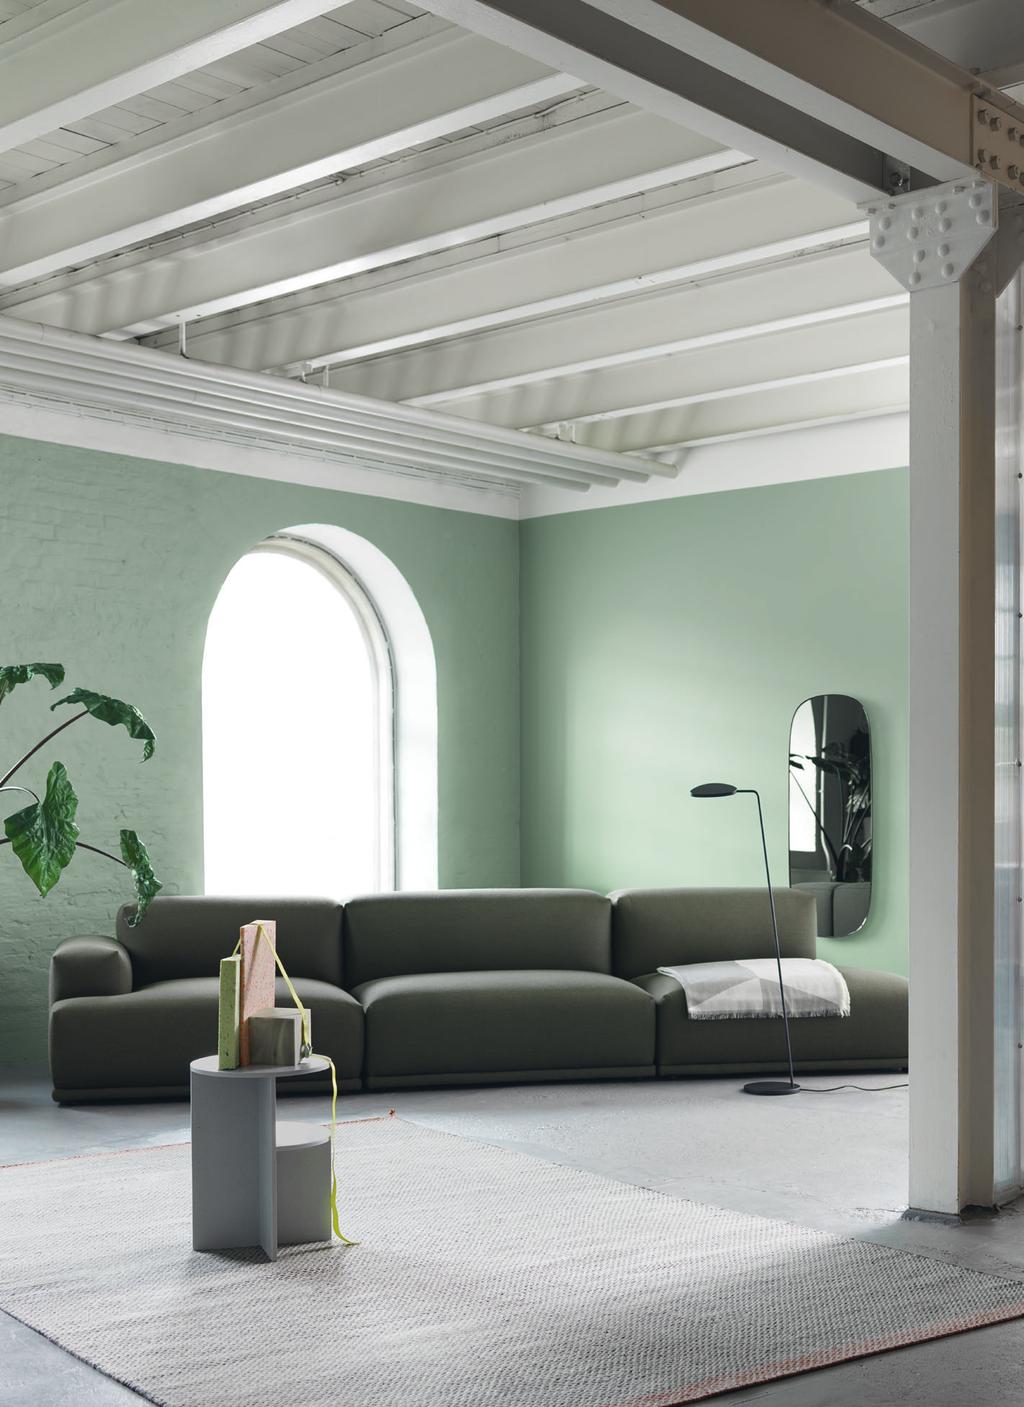 HALVES SIDE TABLE by MSDS Studio p. 53 CONNECT MODULAR SOFA by Anderssen & Voll p.